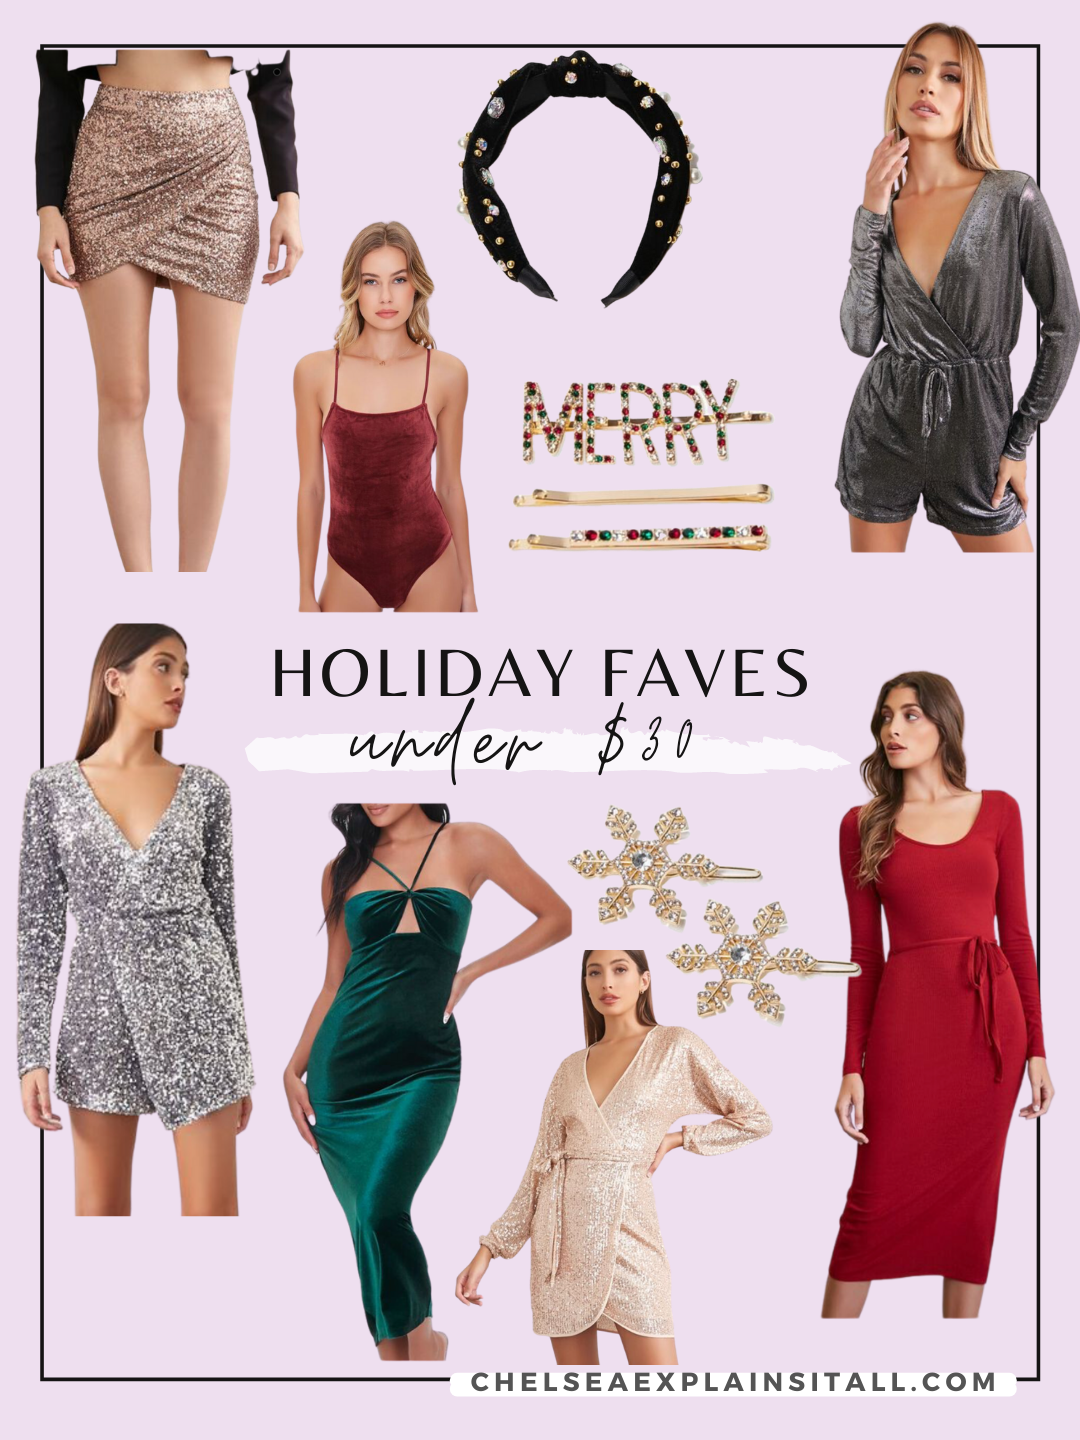 HOLIDAY ACCESSORIES AND OUTFITS